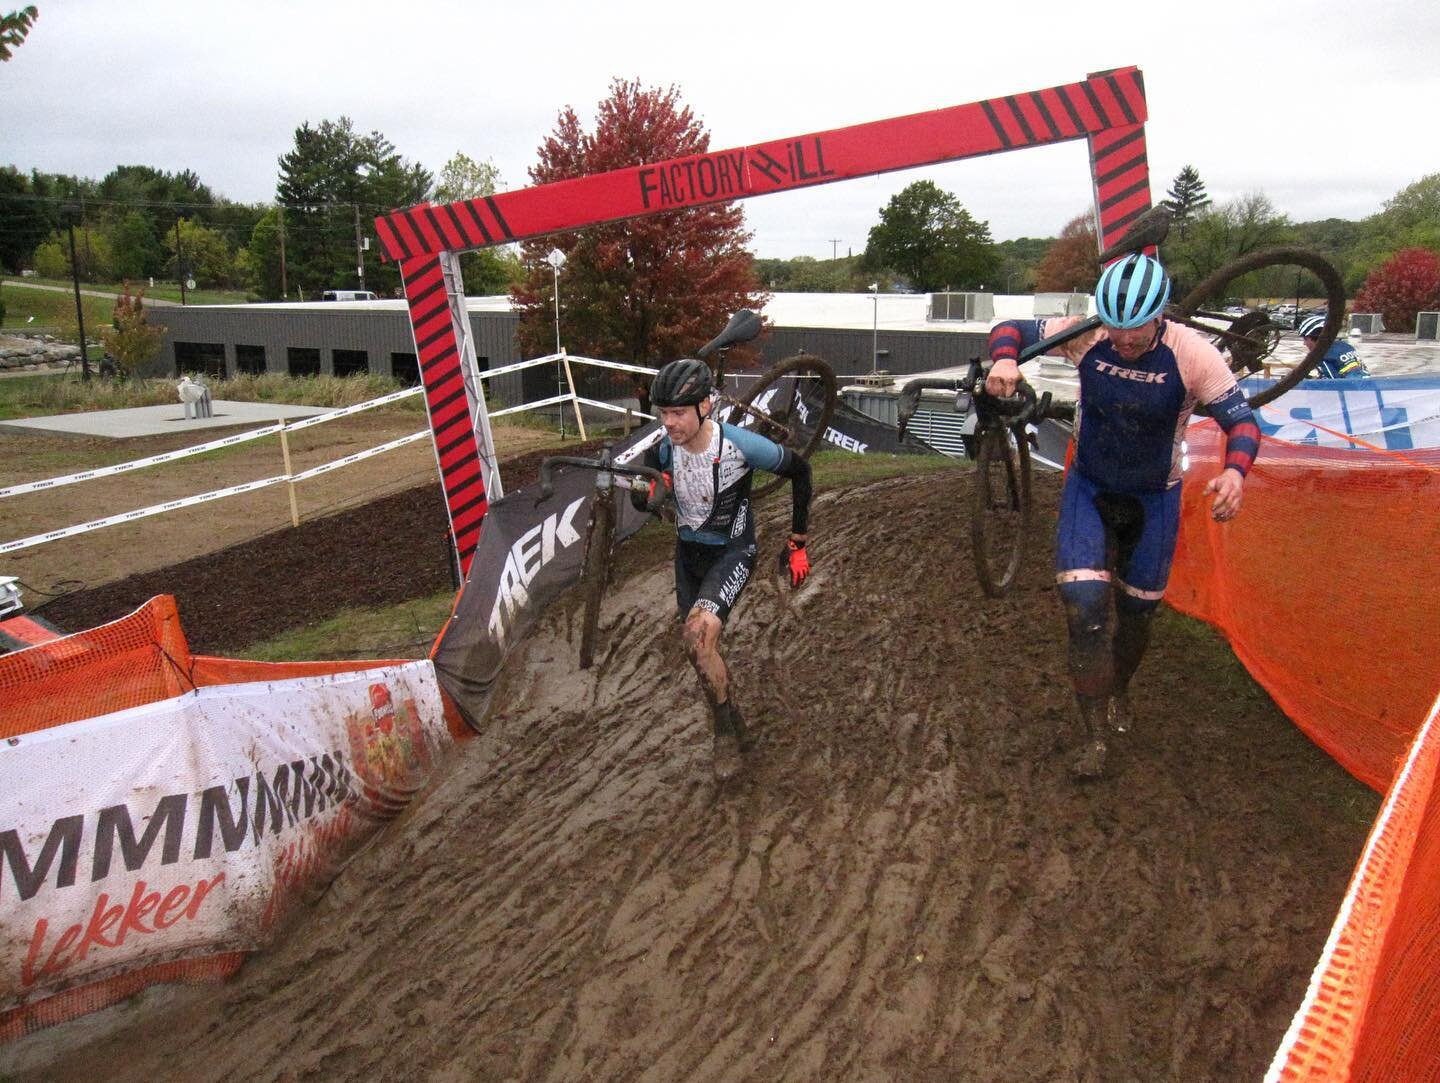 Digi cam views from day one of Trek CX Cup in Wisconsin &ndash; we got a months worth of rain in 24hrs, lined up in a field of 150+ racers, ran a bit more than we would have liked, kept it mostly upright. 

Slide into the DM's if you know anything ab